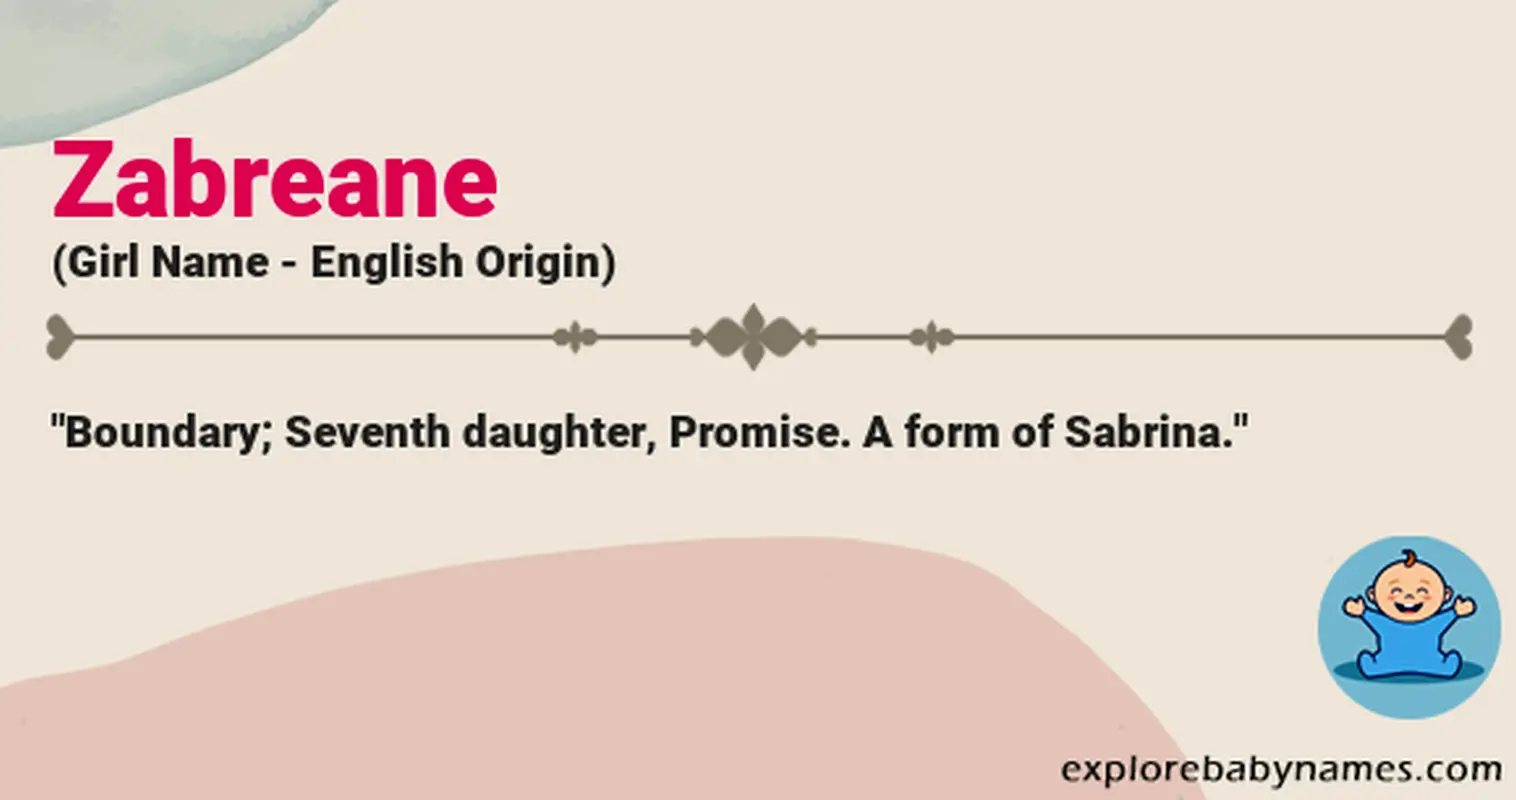 Meaning of Zabreane